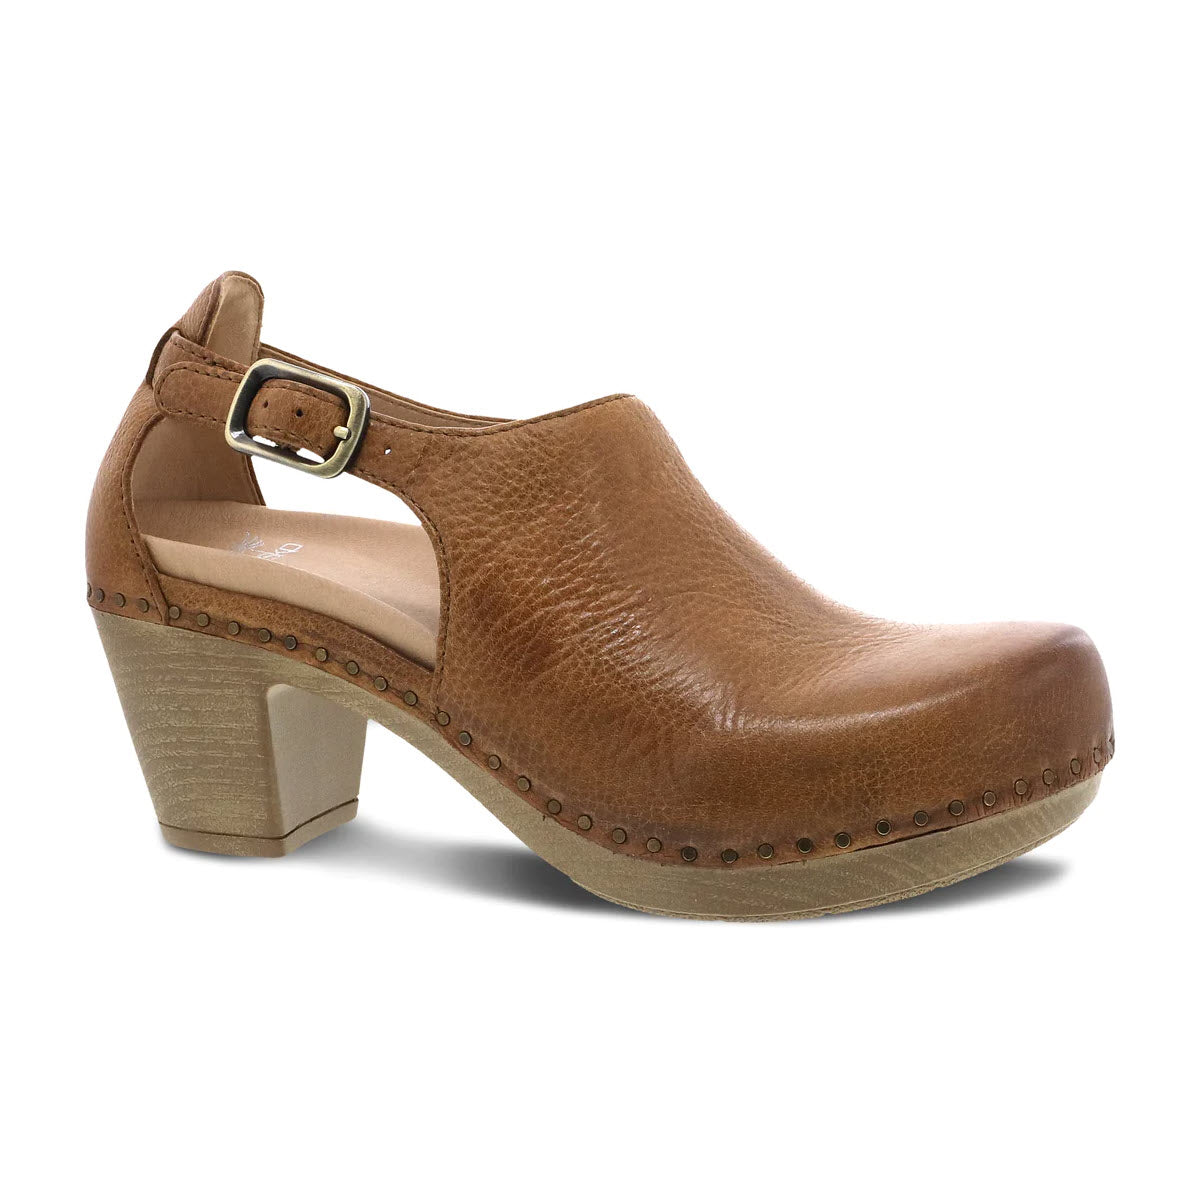 Dansko Sassy Tan women's clog with a buckle, wooden heel, and studded details around the sole, isolated on a white background.